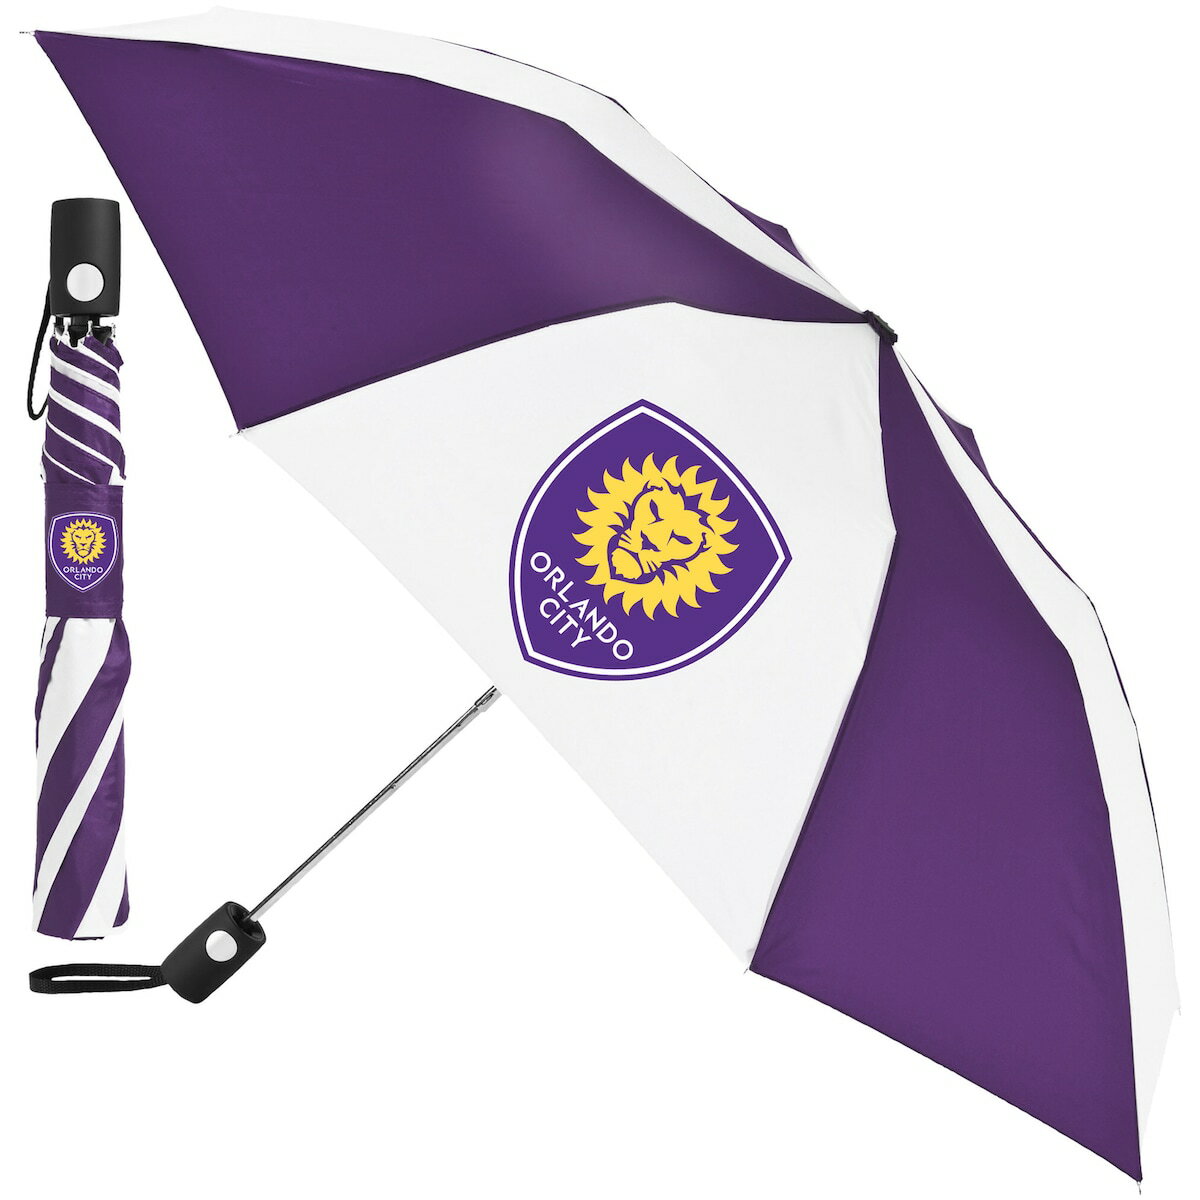 Stay prepared for rainstorms with this Orlando City SC Game Day umbrella from WinCraft. It conveniently collapses into a size that's small enough to fit in your bag or purse. Plus, the Orlando City SC graphics and colors keep your team spirit displayed during inclement weather.Officially licensedCollapsibleWipe clean with a damp clothPrinted graphicsMaterial: 100% PolyesterHandle extends to approx. 22'' in lengthAttached carrying strap with hook and loop closureImportedBrand: WinCraftPush-button handleLarge canopy measures approx. 42'' in diameter